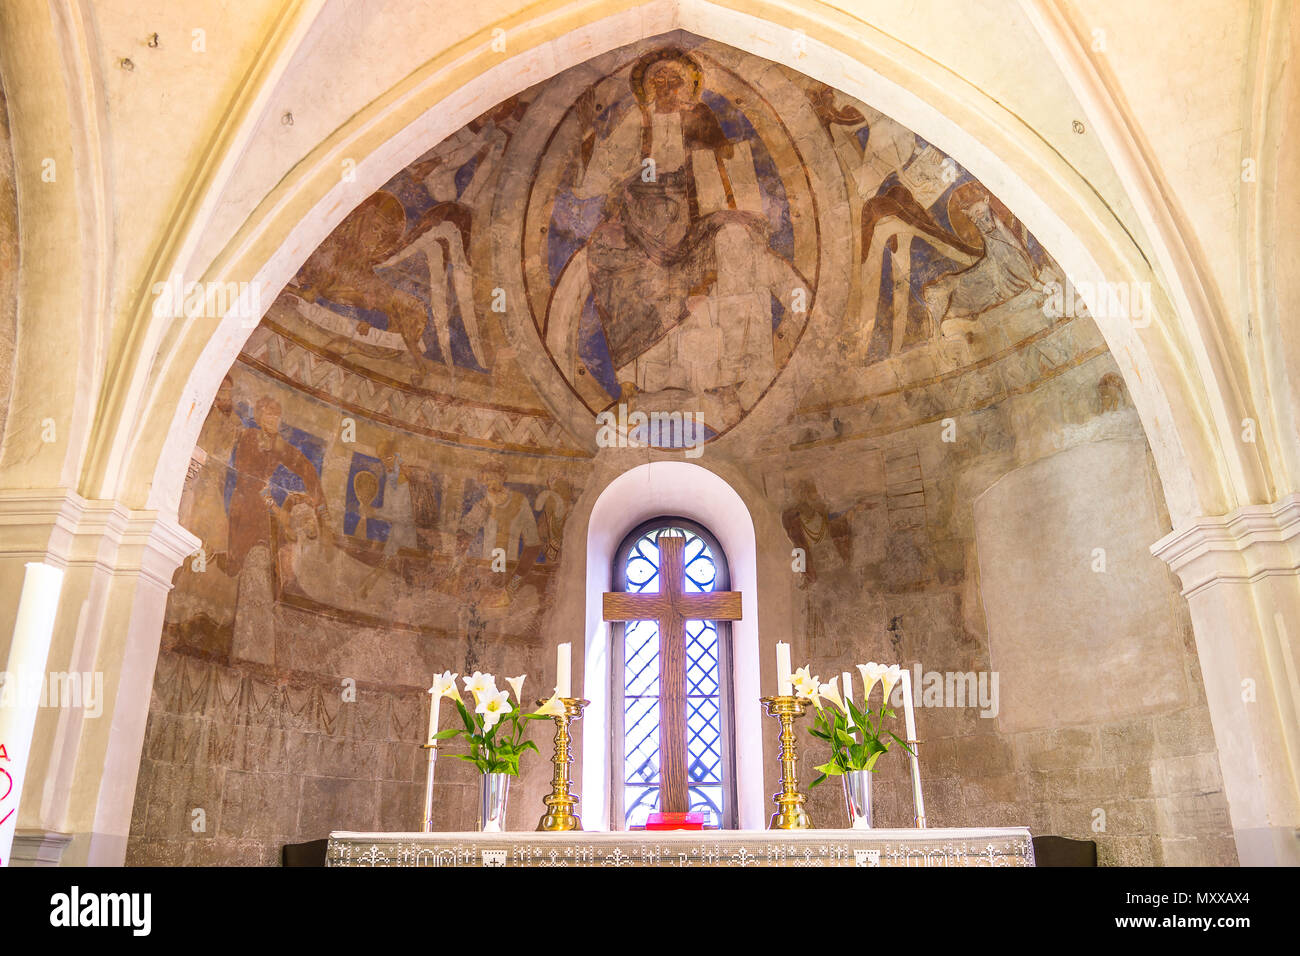 The altar and apse with christ pantocrator, majestas domini, sitting on the rainbow, Romanesque mural in Vinslov church, Sweden, May 9, 2018 Stock Photo